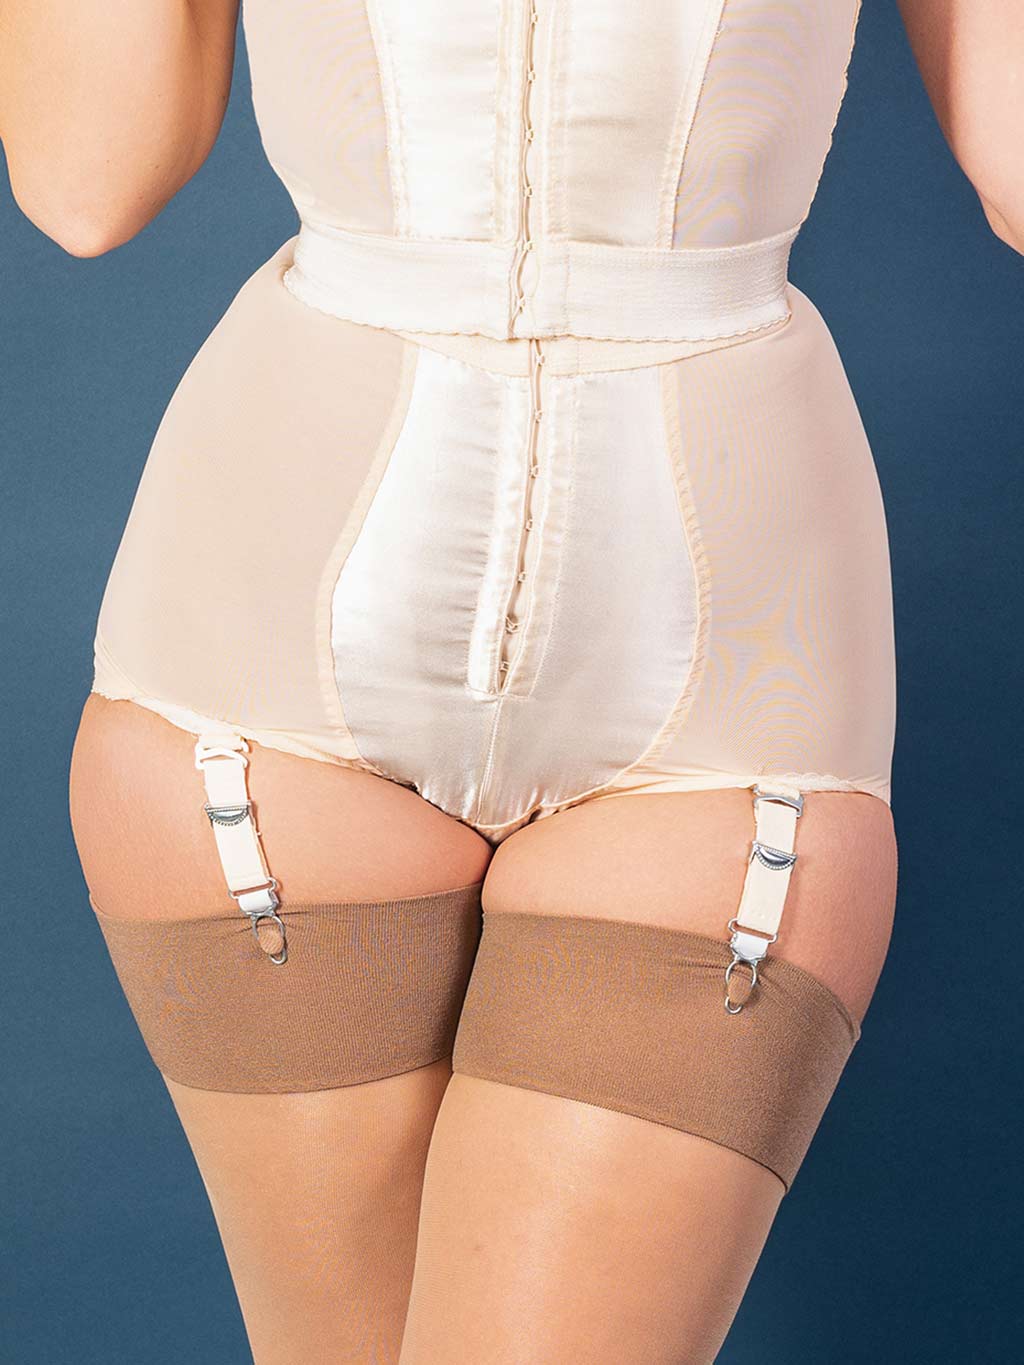 Girdles with Suspenders